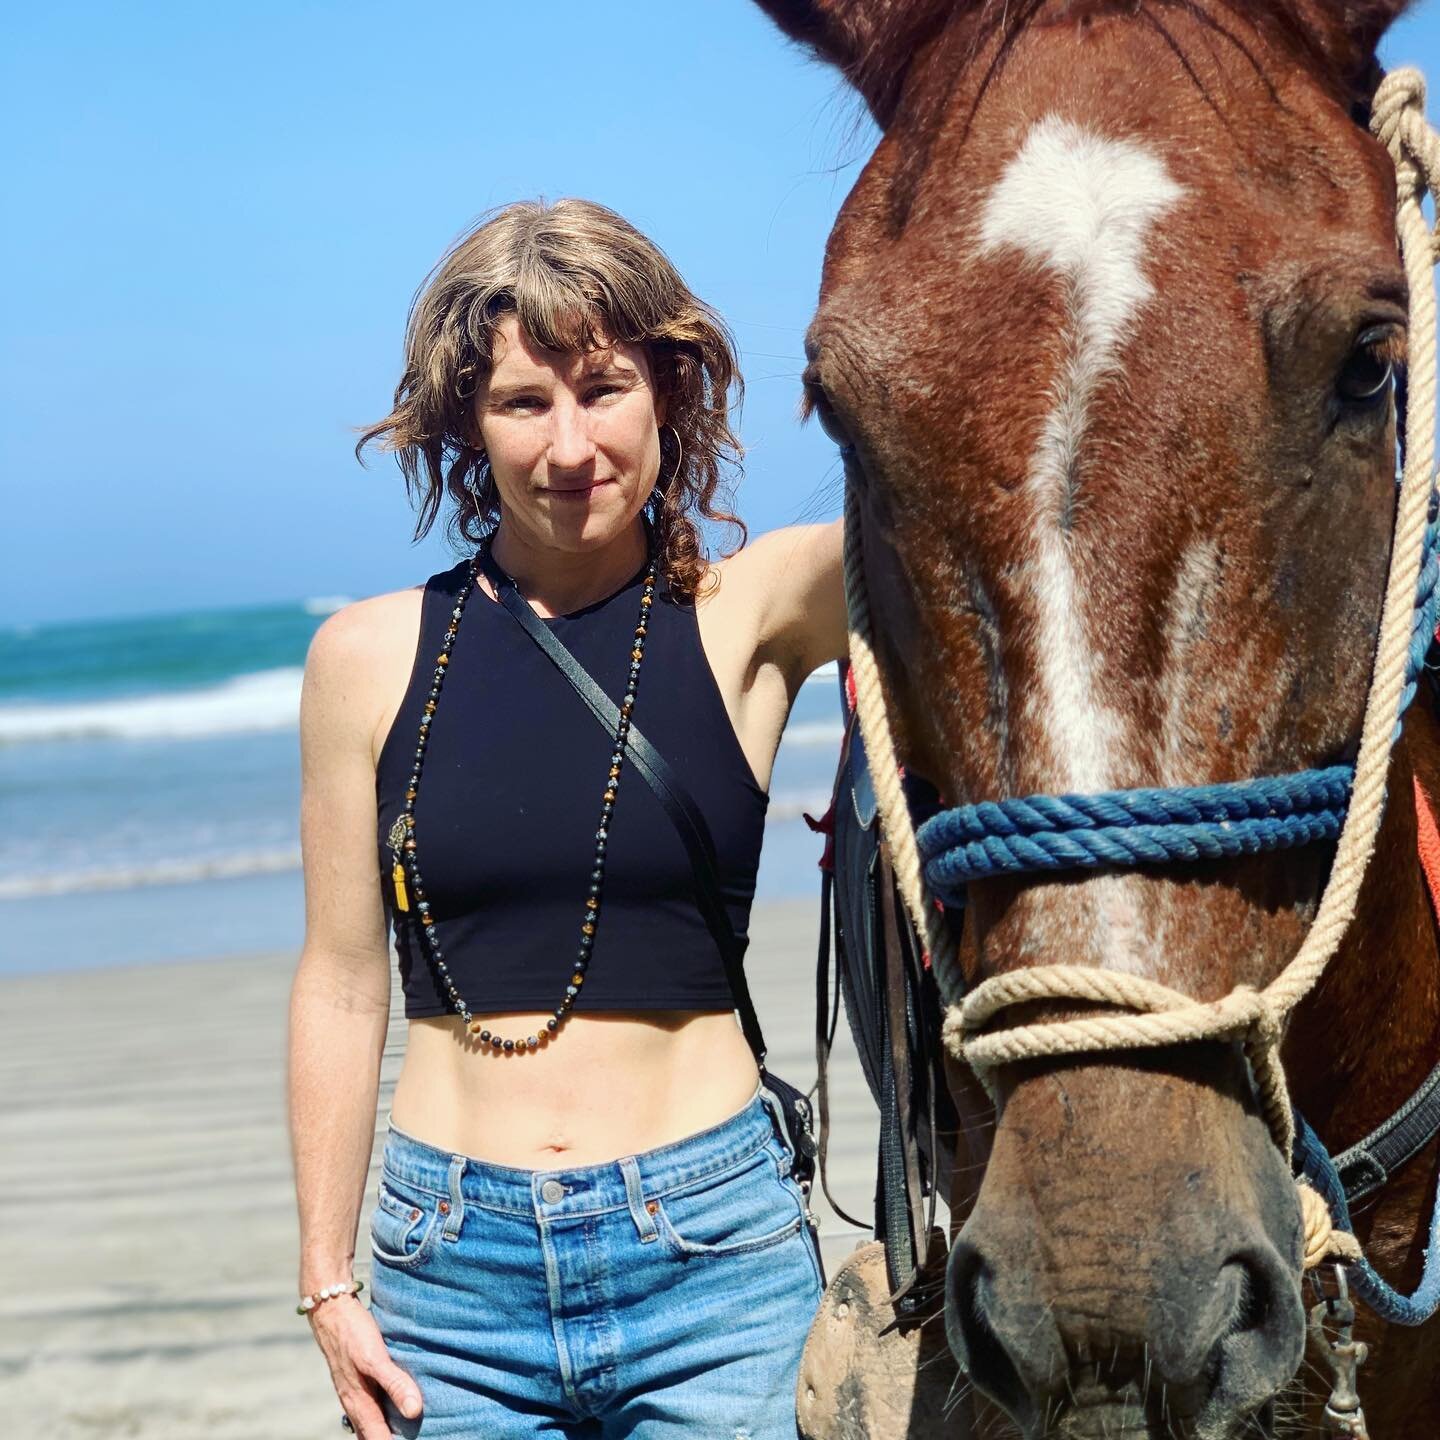 I crawled myself to Costa Rica, depleted from one of the most challenging years. Happy to report that I danced, meditated, ate, prayed + galloped myself back to wellness. Leaving more myself.

And also someone who now wants a horse 🐎 🤣

#replenishs